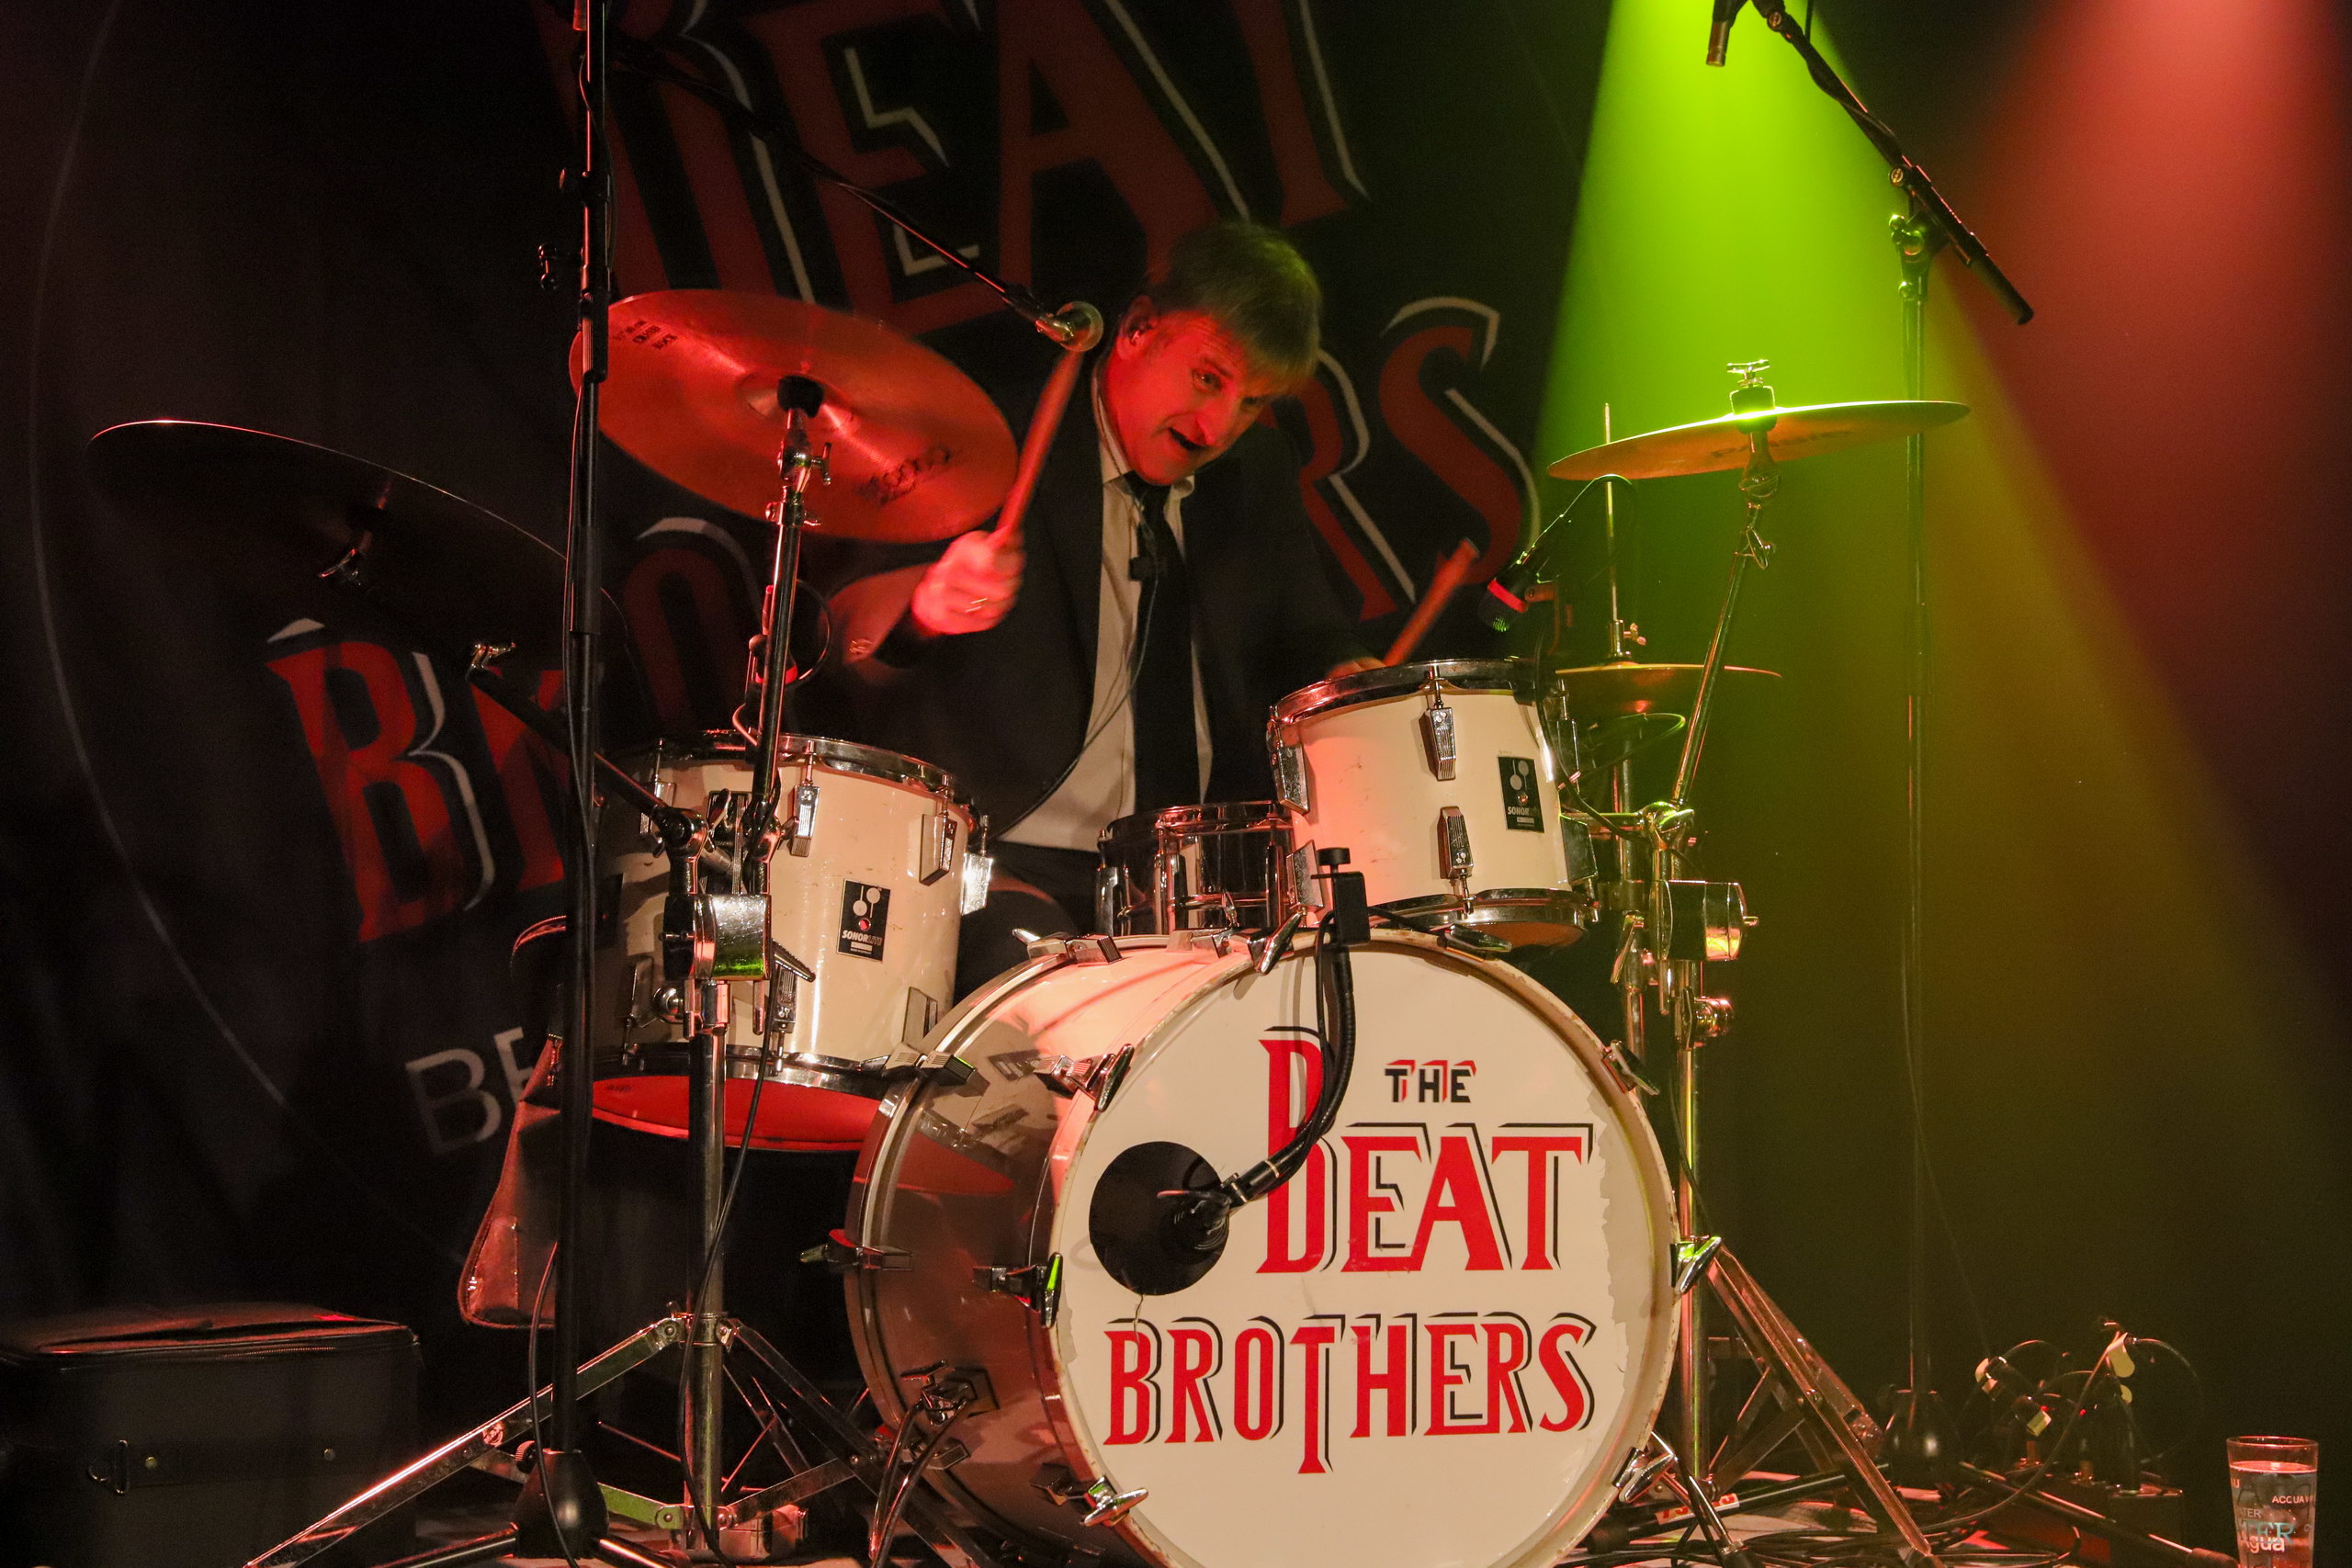 Arno, The Beat Brothers best drummer ever!